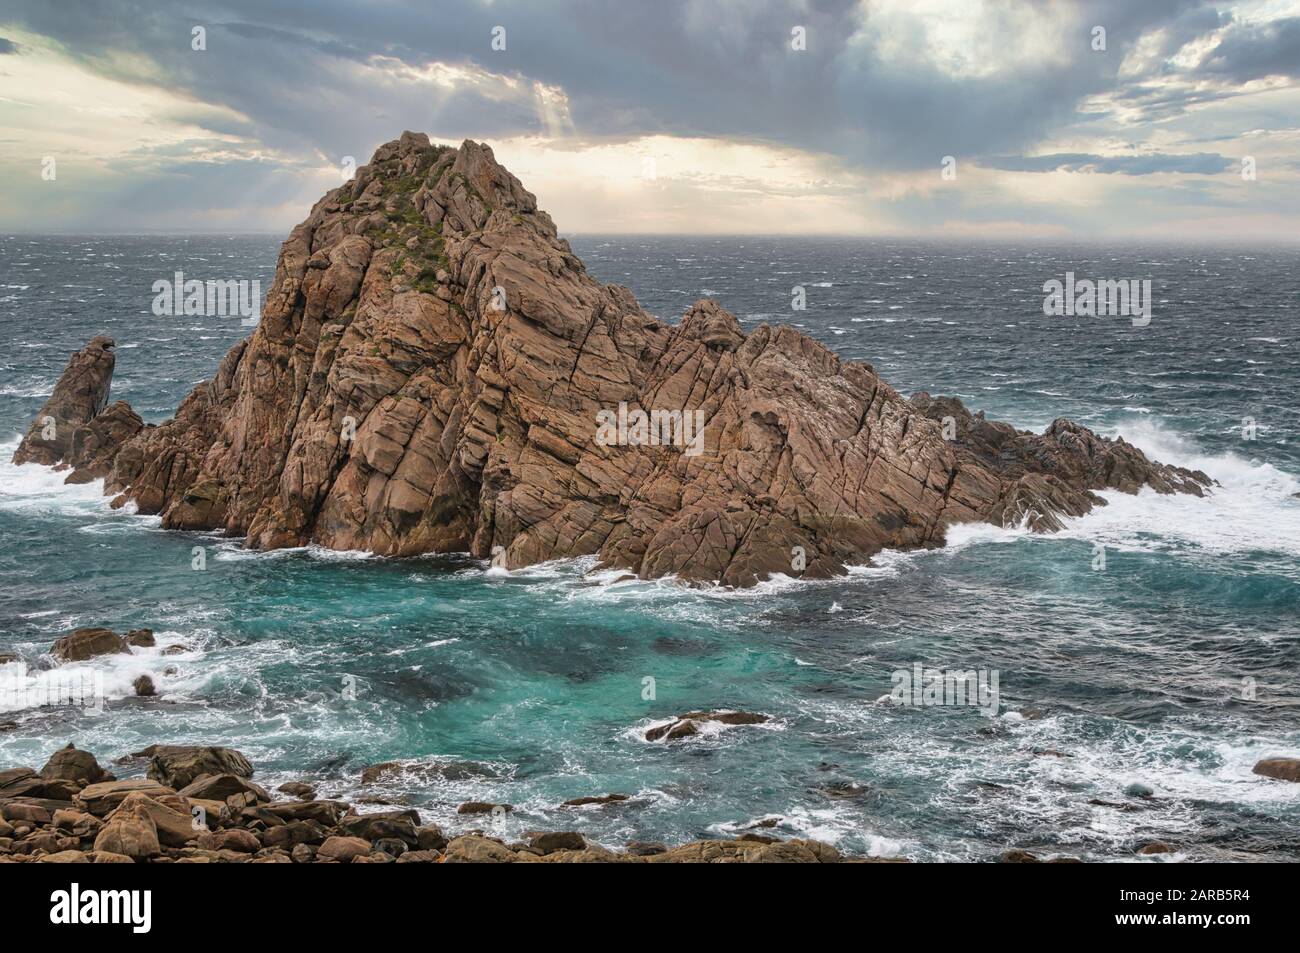 Sugar Loaf Rock in the Indian Ocean is framed by rough seas and heavy storm clouds on the wild Western Australian coastline. Stock Photo